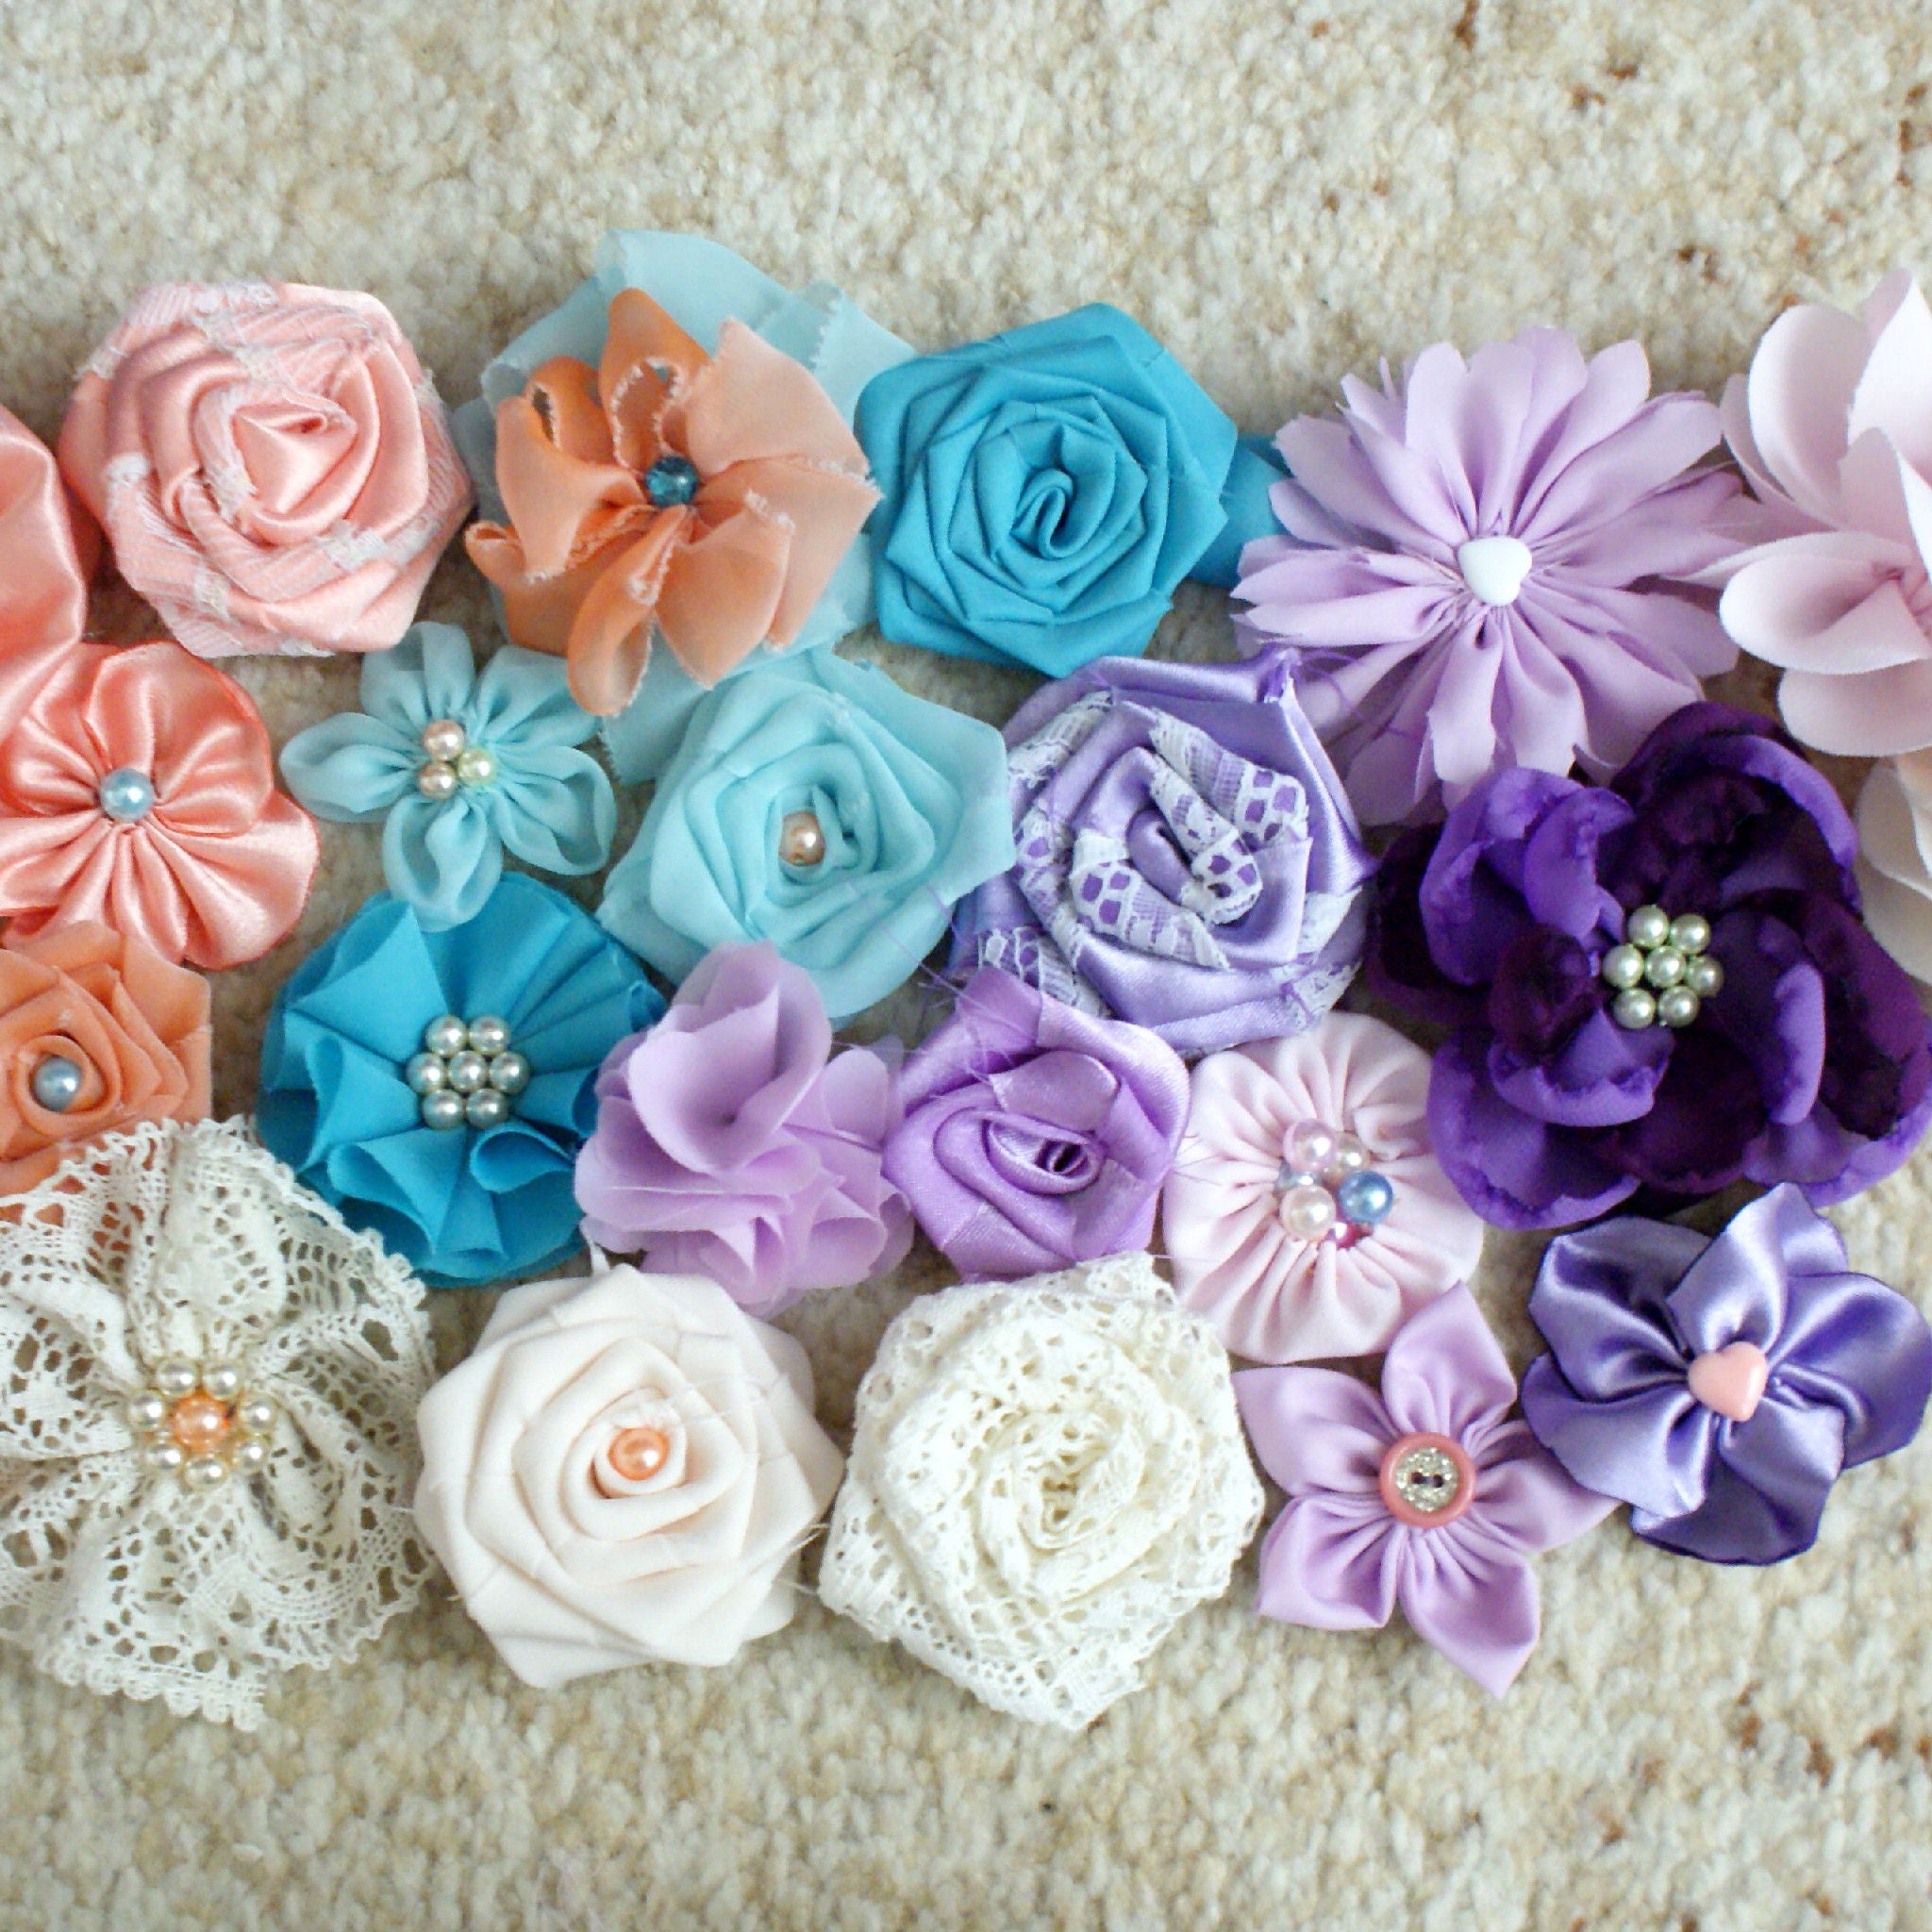 Different Shapes Size Color Fabric Flowers by Indian Petals for Craft or Designing